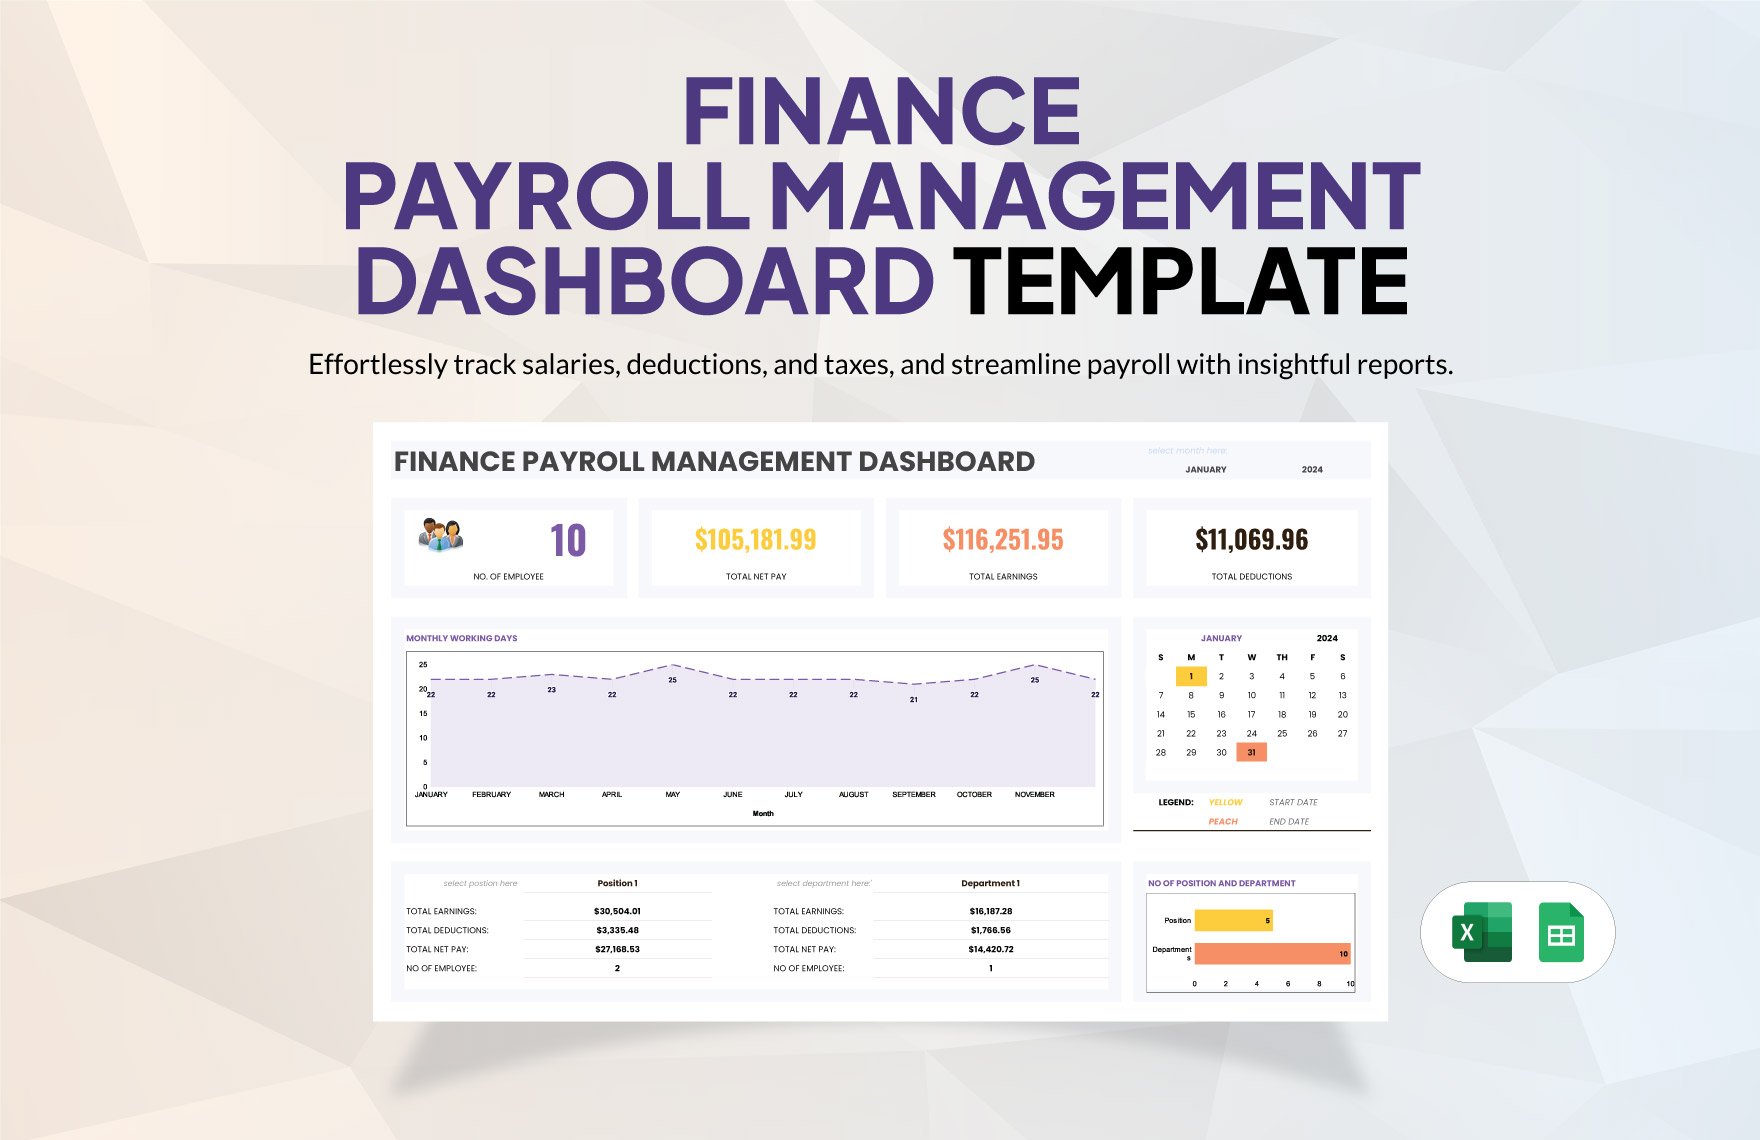 Finance Payroll Management Dashboard Template in Excel, Google Sheets